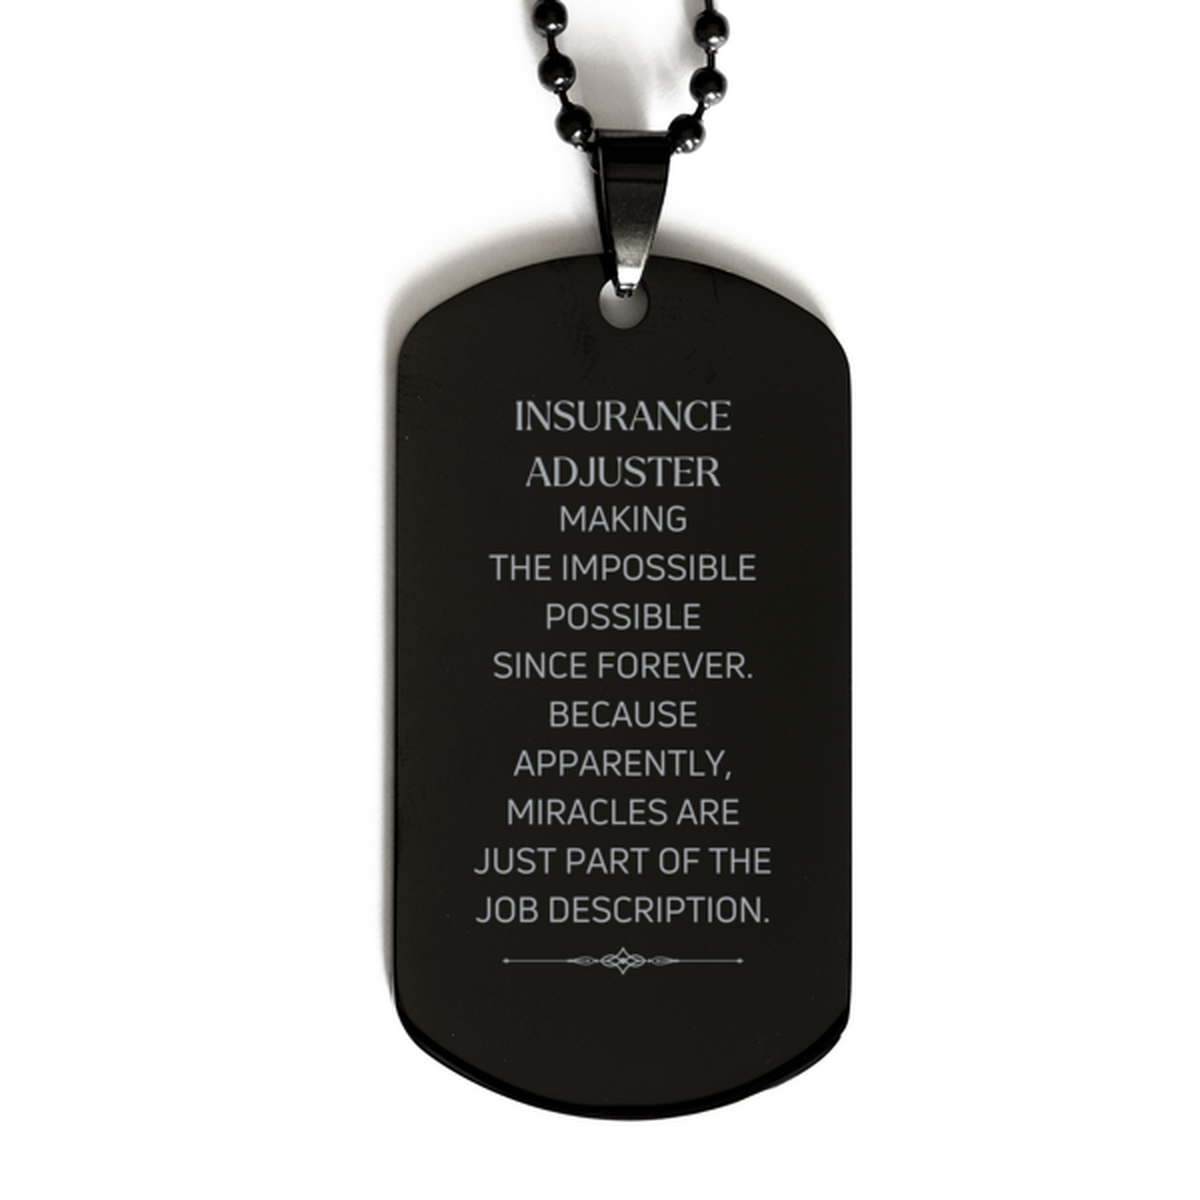 Funny Insurance Adjuster Gifts, Miracles are just part of the job description, Inspirational Birthday Black Dog Tag For Insurance Adjuster, Men, Women, Coworkers, Friends, Boss